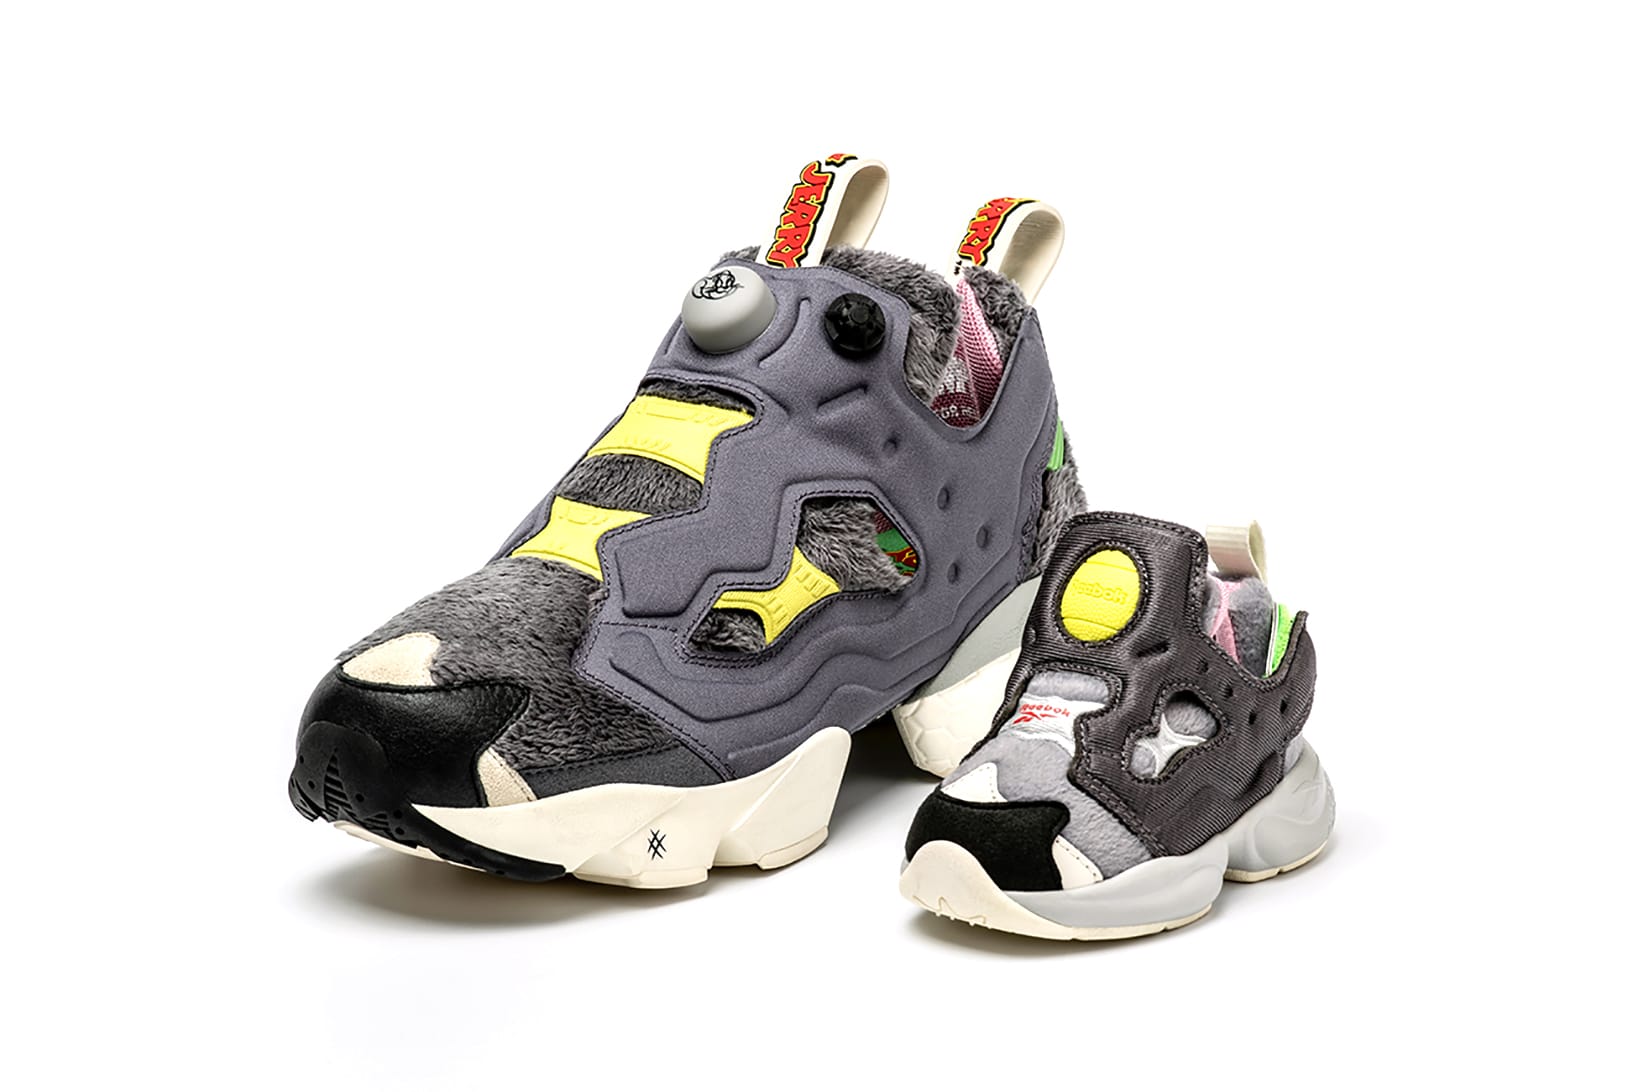 reebok latest collection